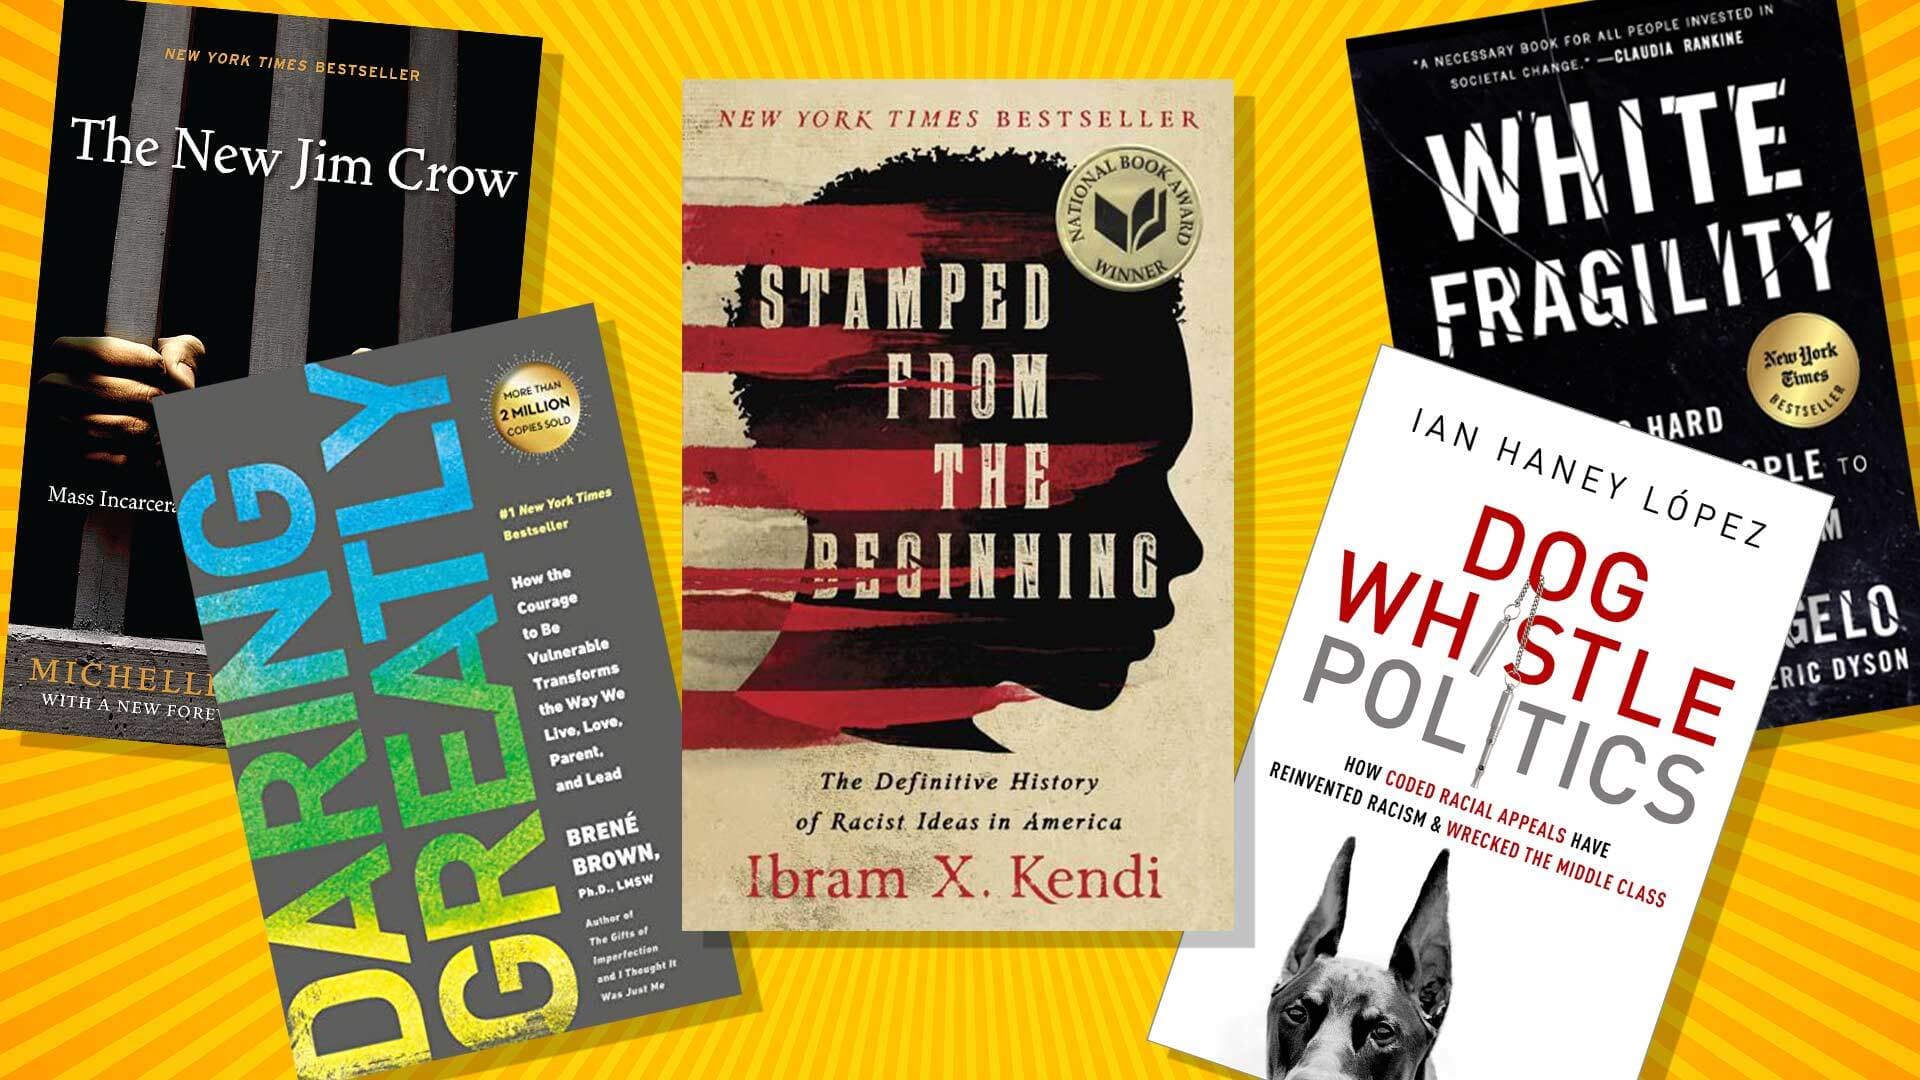 Collage of book covers, including "The New Jim Crow," "Daring Greatly," "Stamped From the Beginning," "Dog Whistle Politics" and " White Fragility"